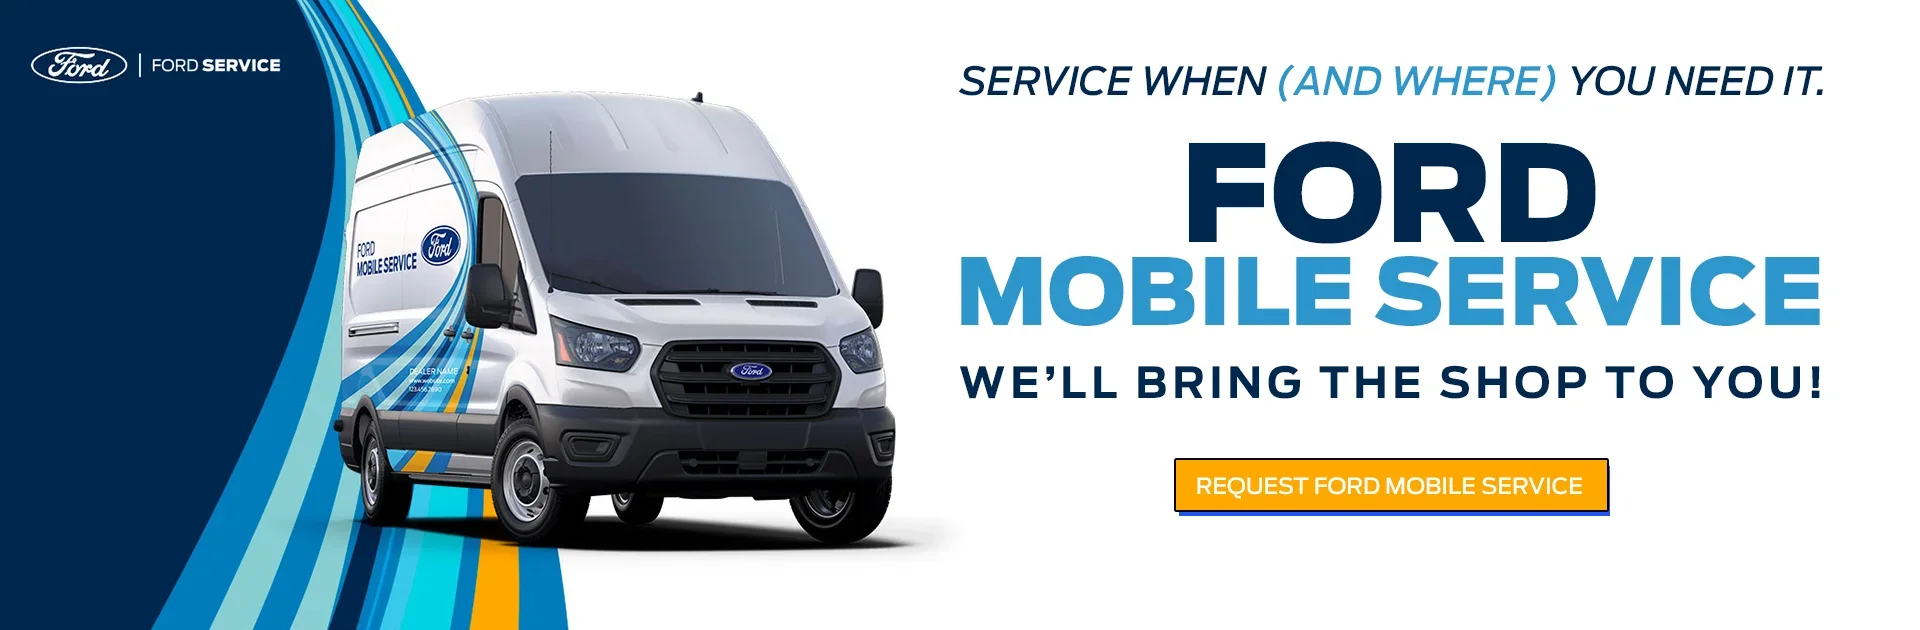 Ford Mobile Service 